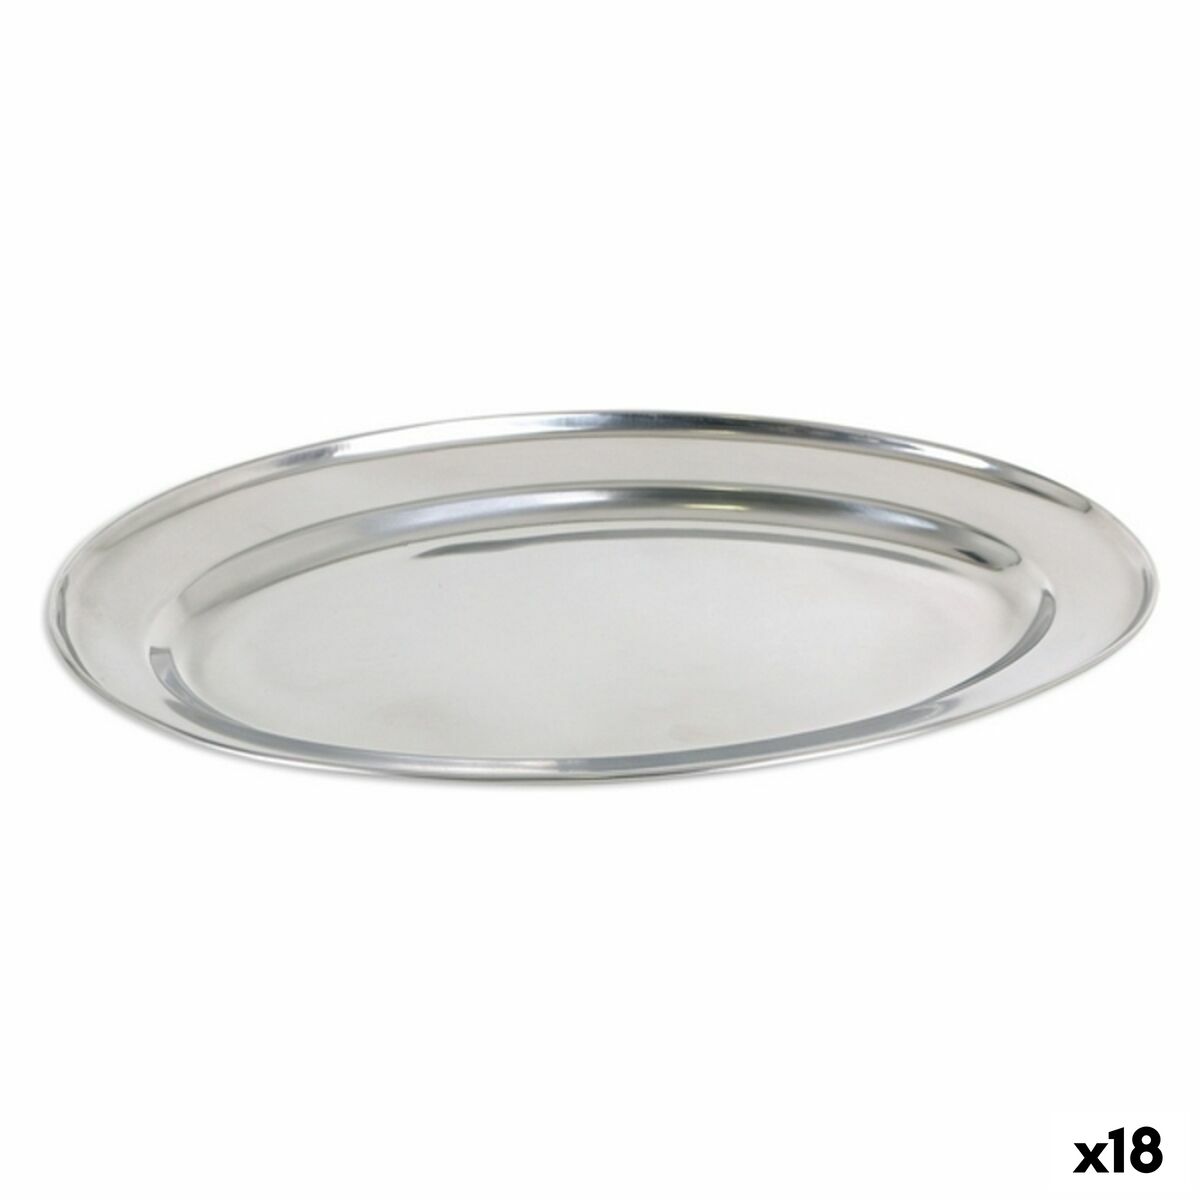 Tray Privilege 42853 Stainless steel Oval (18 Units) (35 x 22,2 cm)